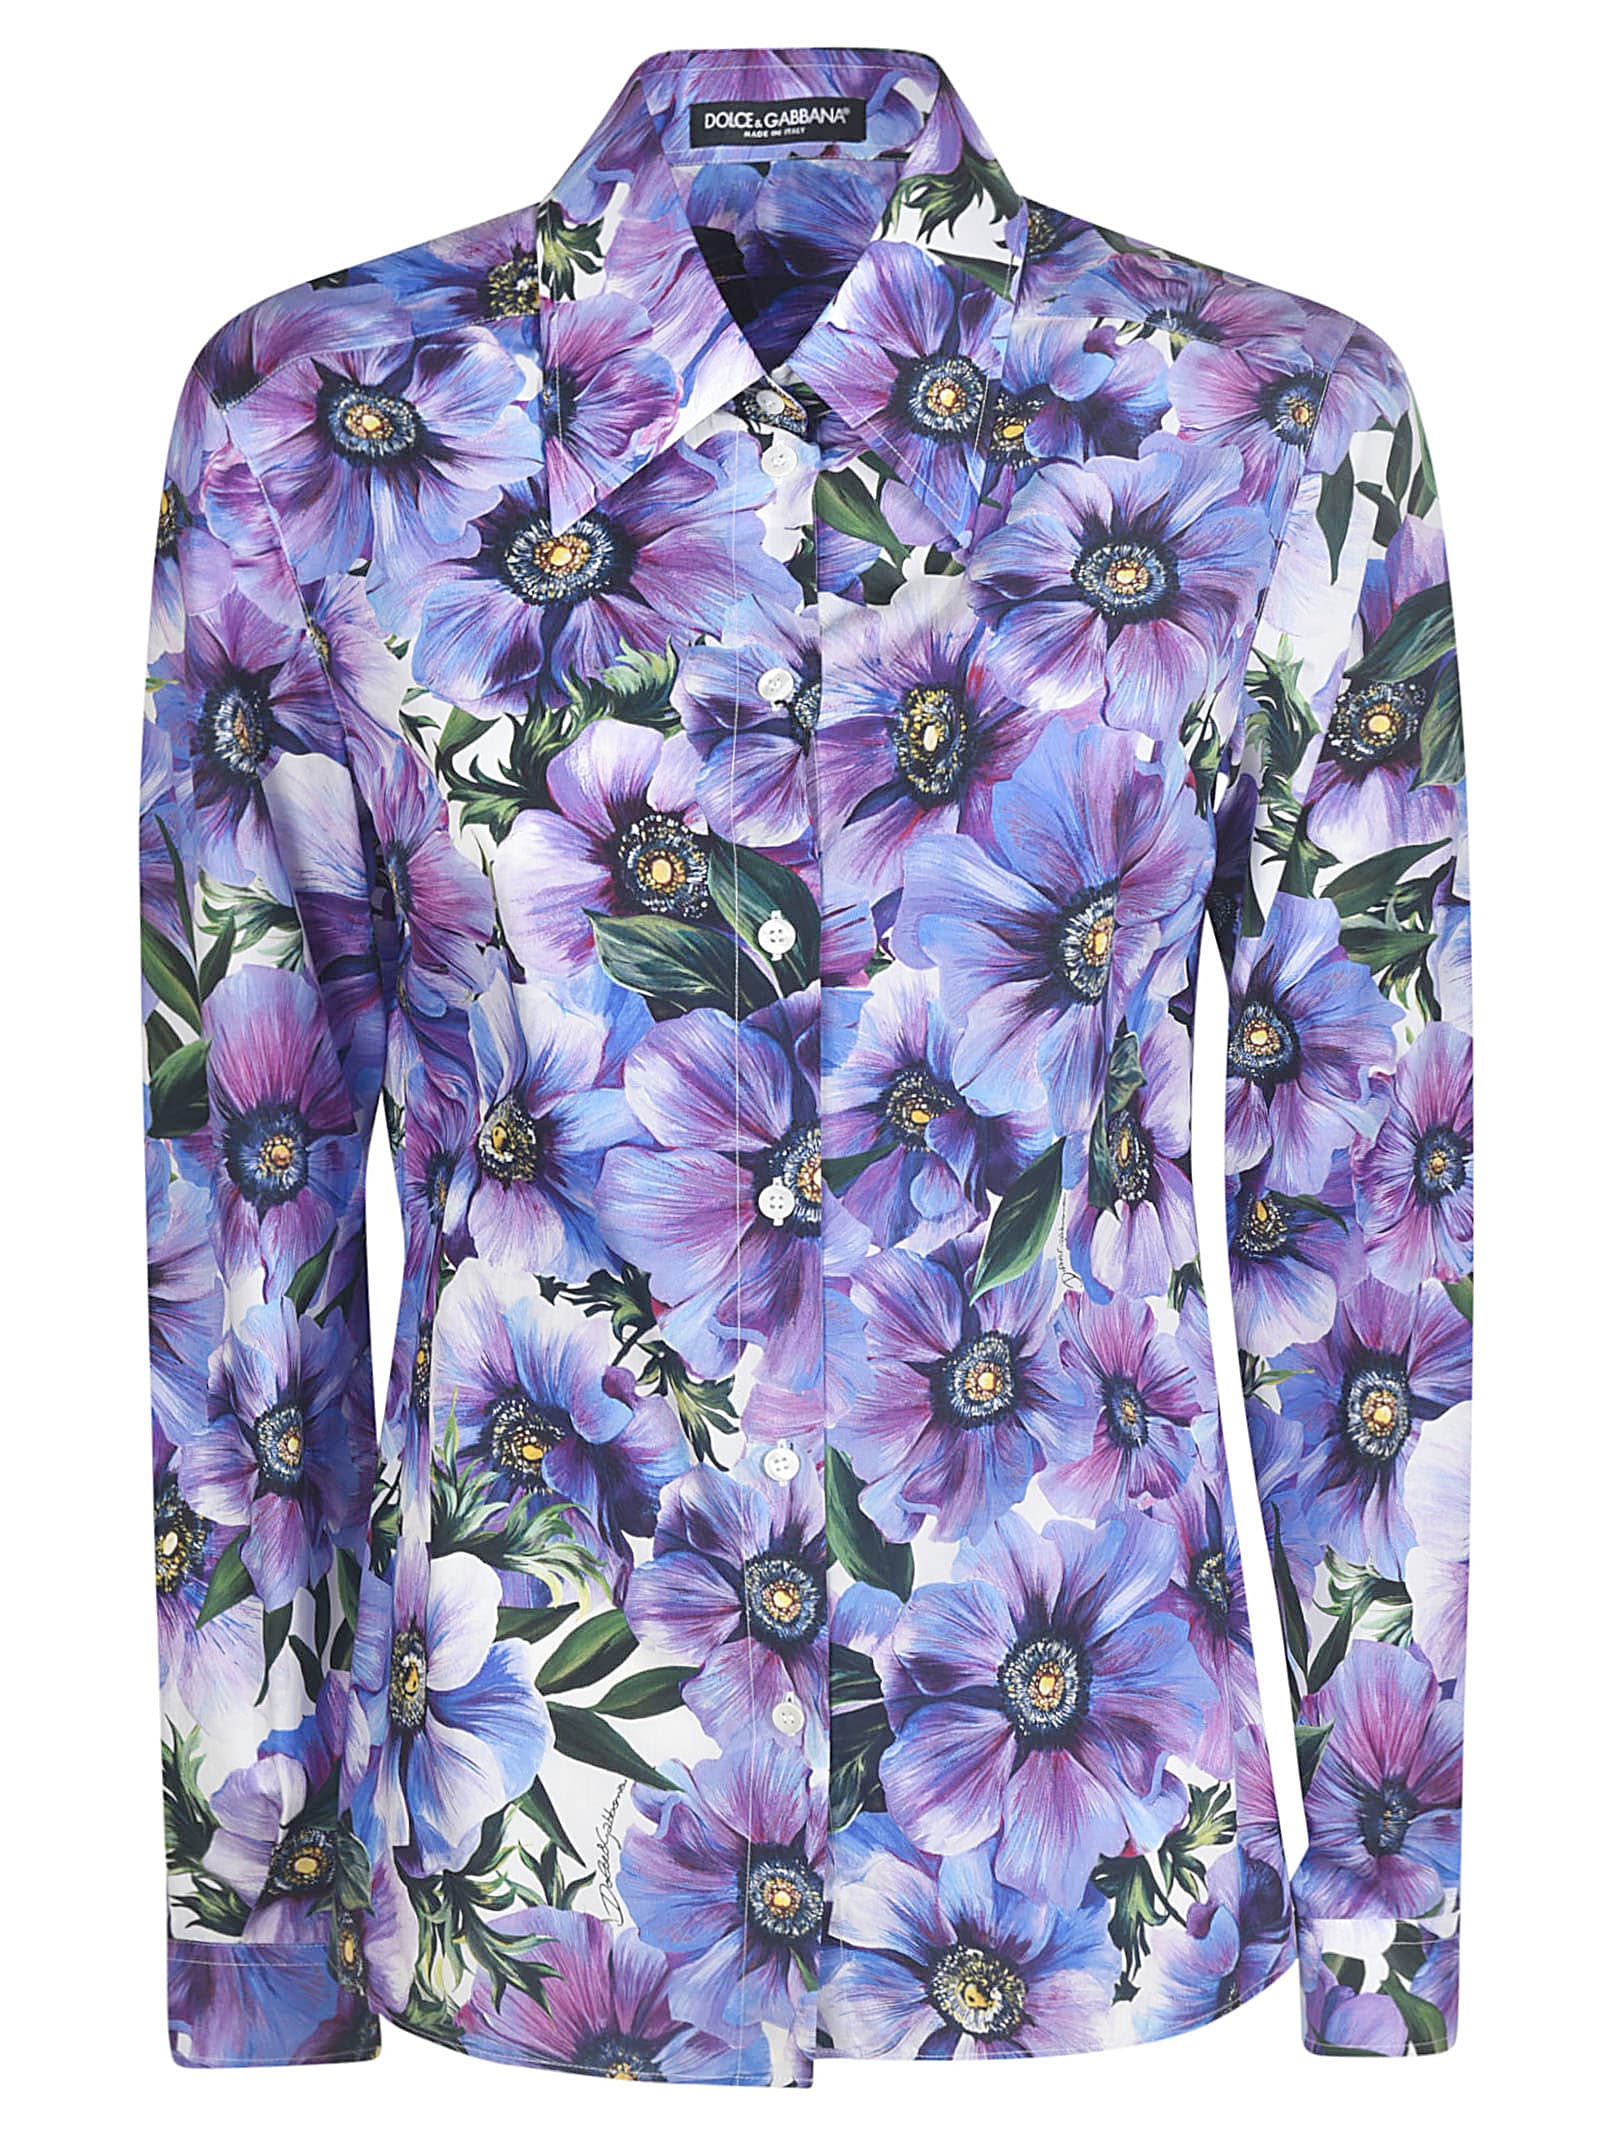 DOLCE & GABBANA ALL-OVER FLORAL PRINTED SHIRT,11260774